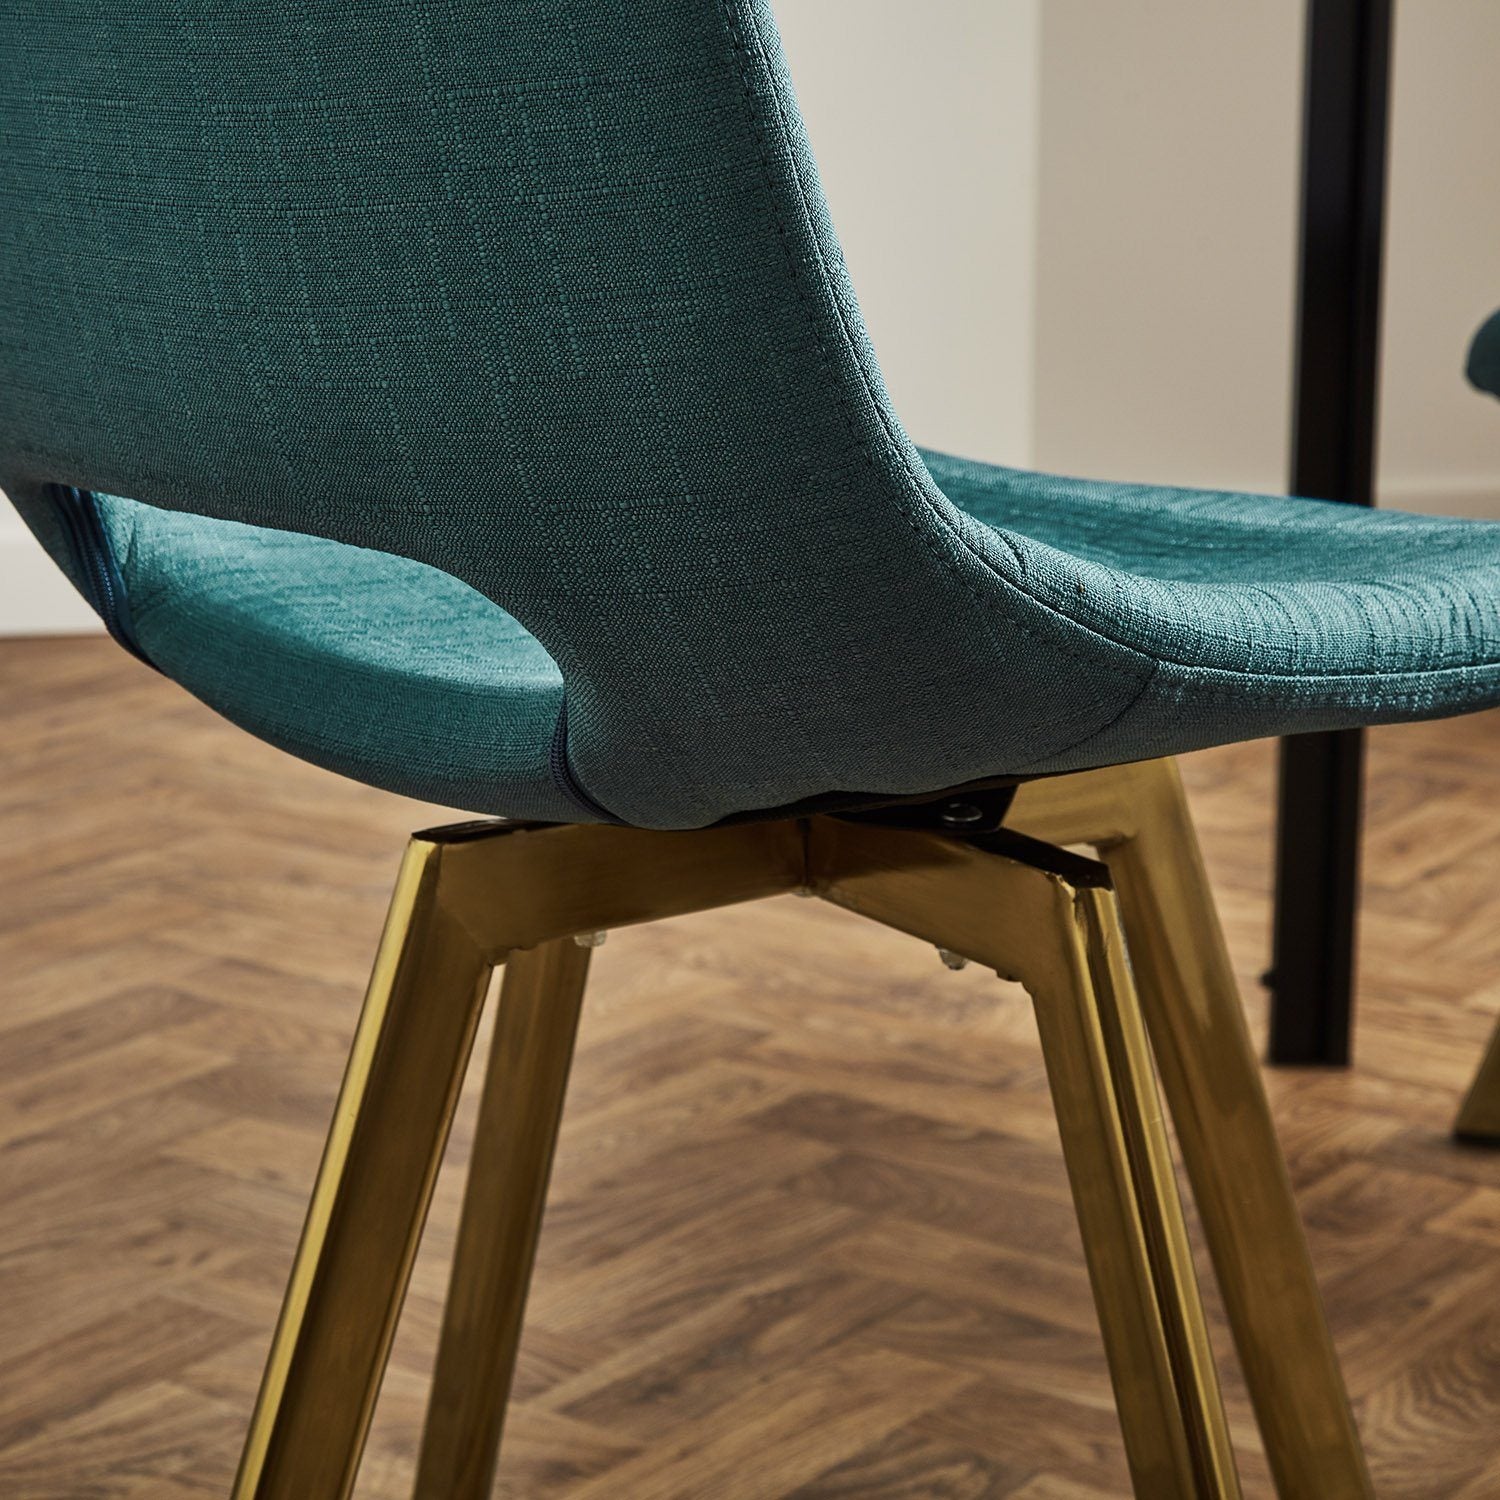 Margot dining chairs x2 - teal and brass- Laura James